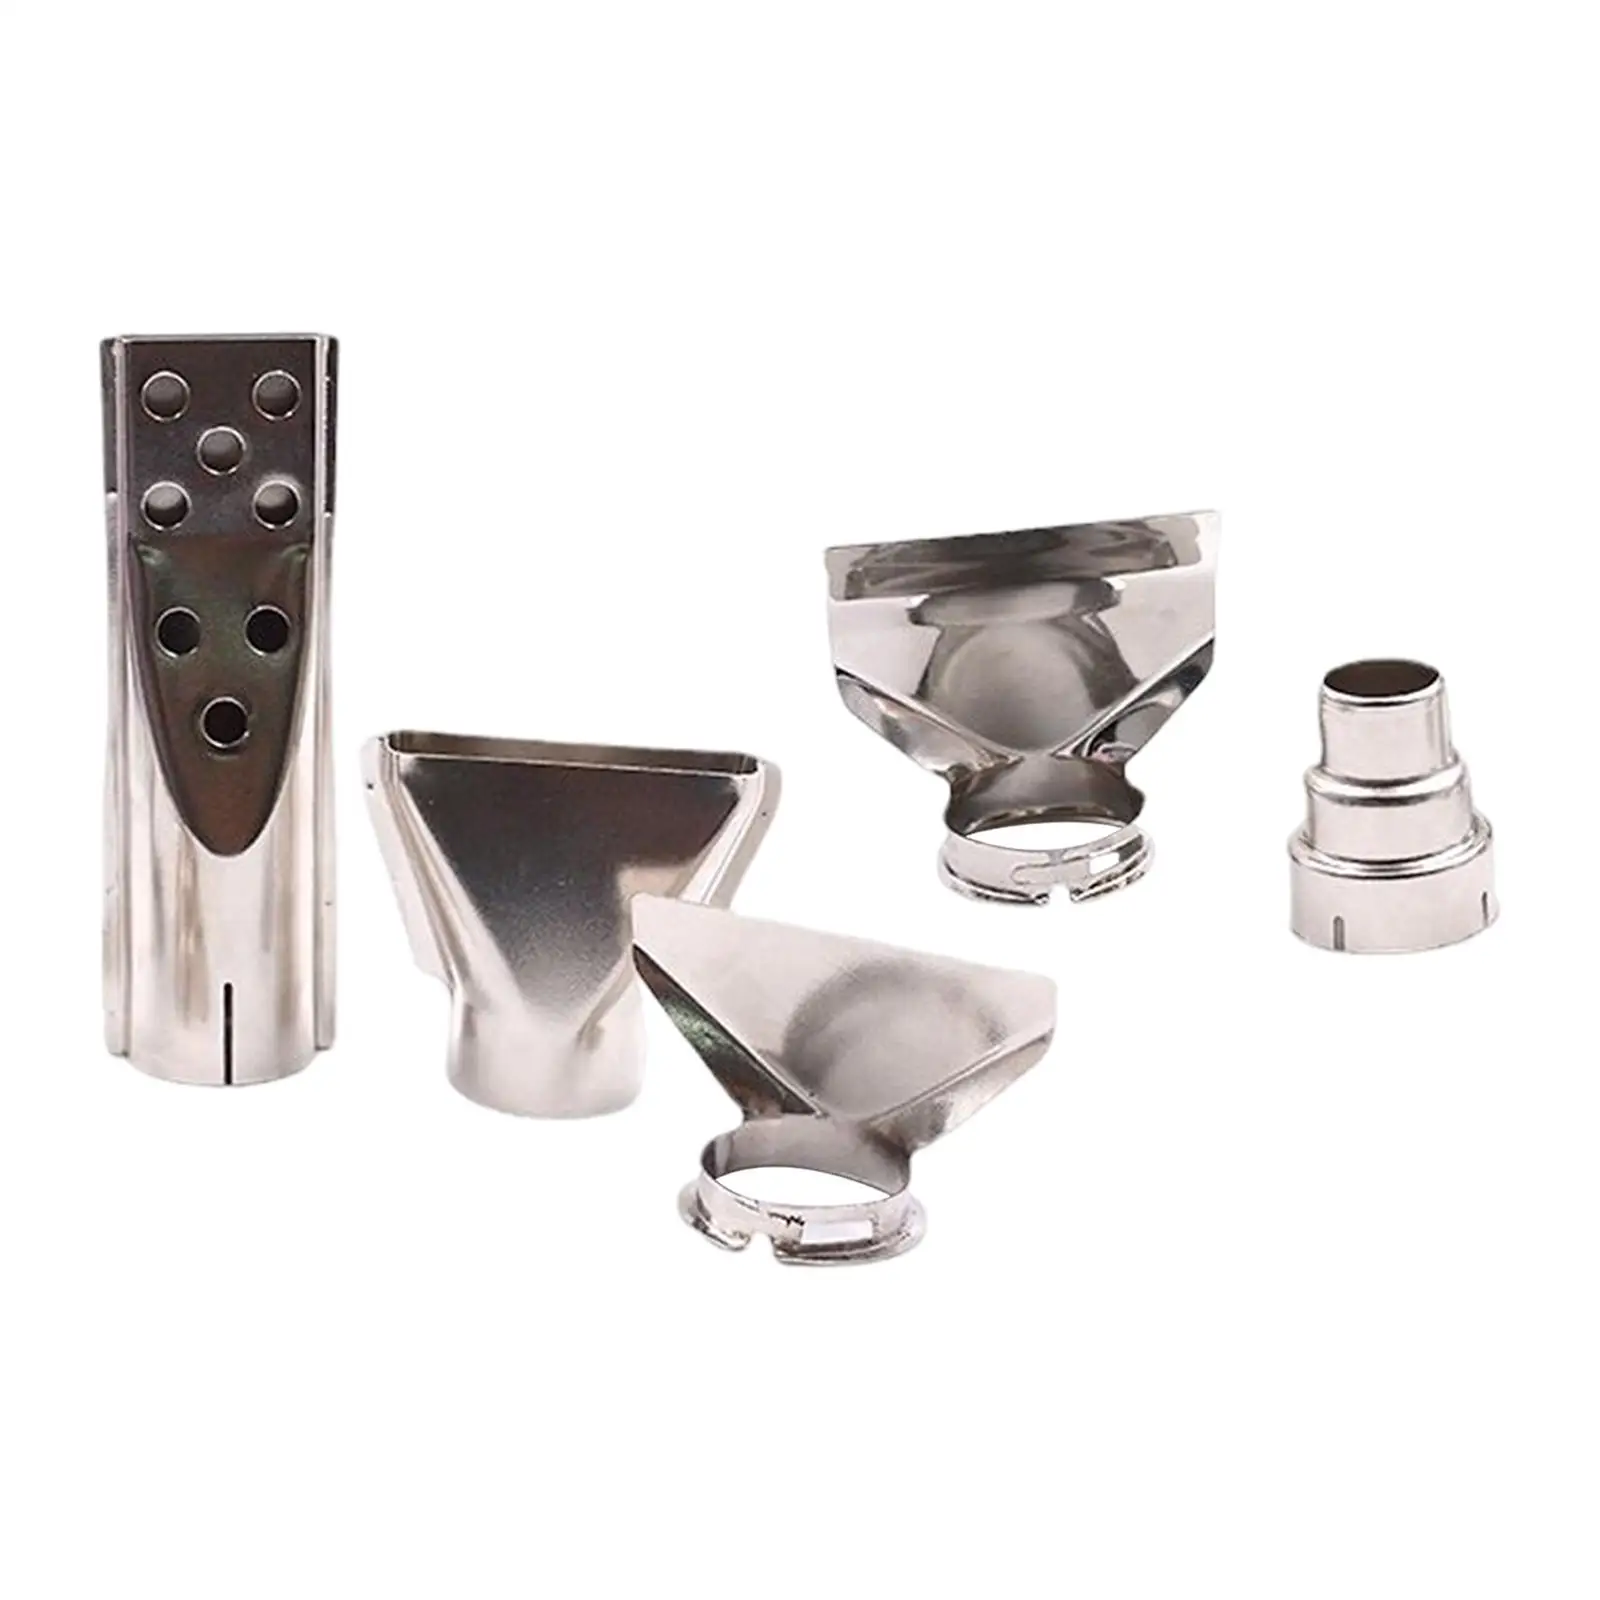 5x Multifunctional Heat Nozzle Attachments Steel Nozzles Replacement Kits for Shrinking Heat